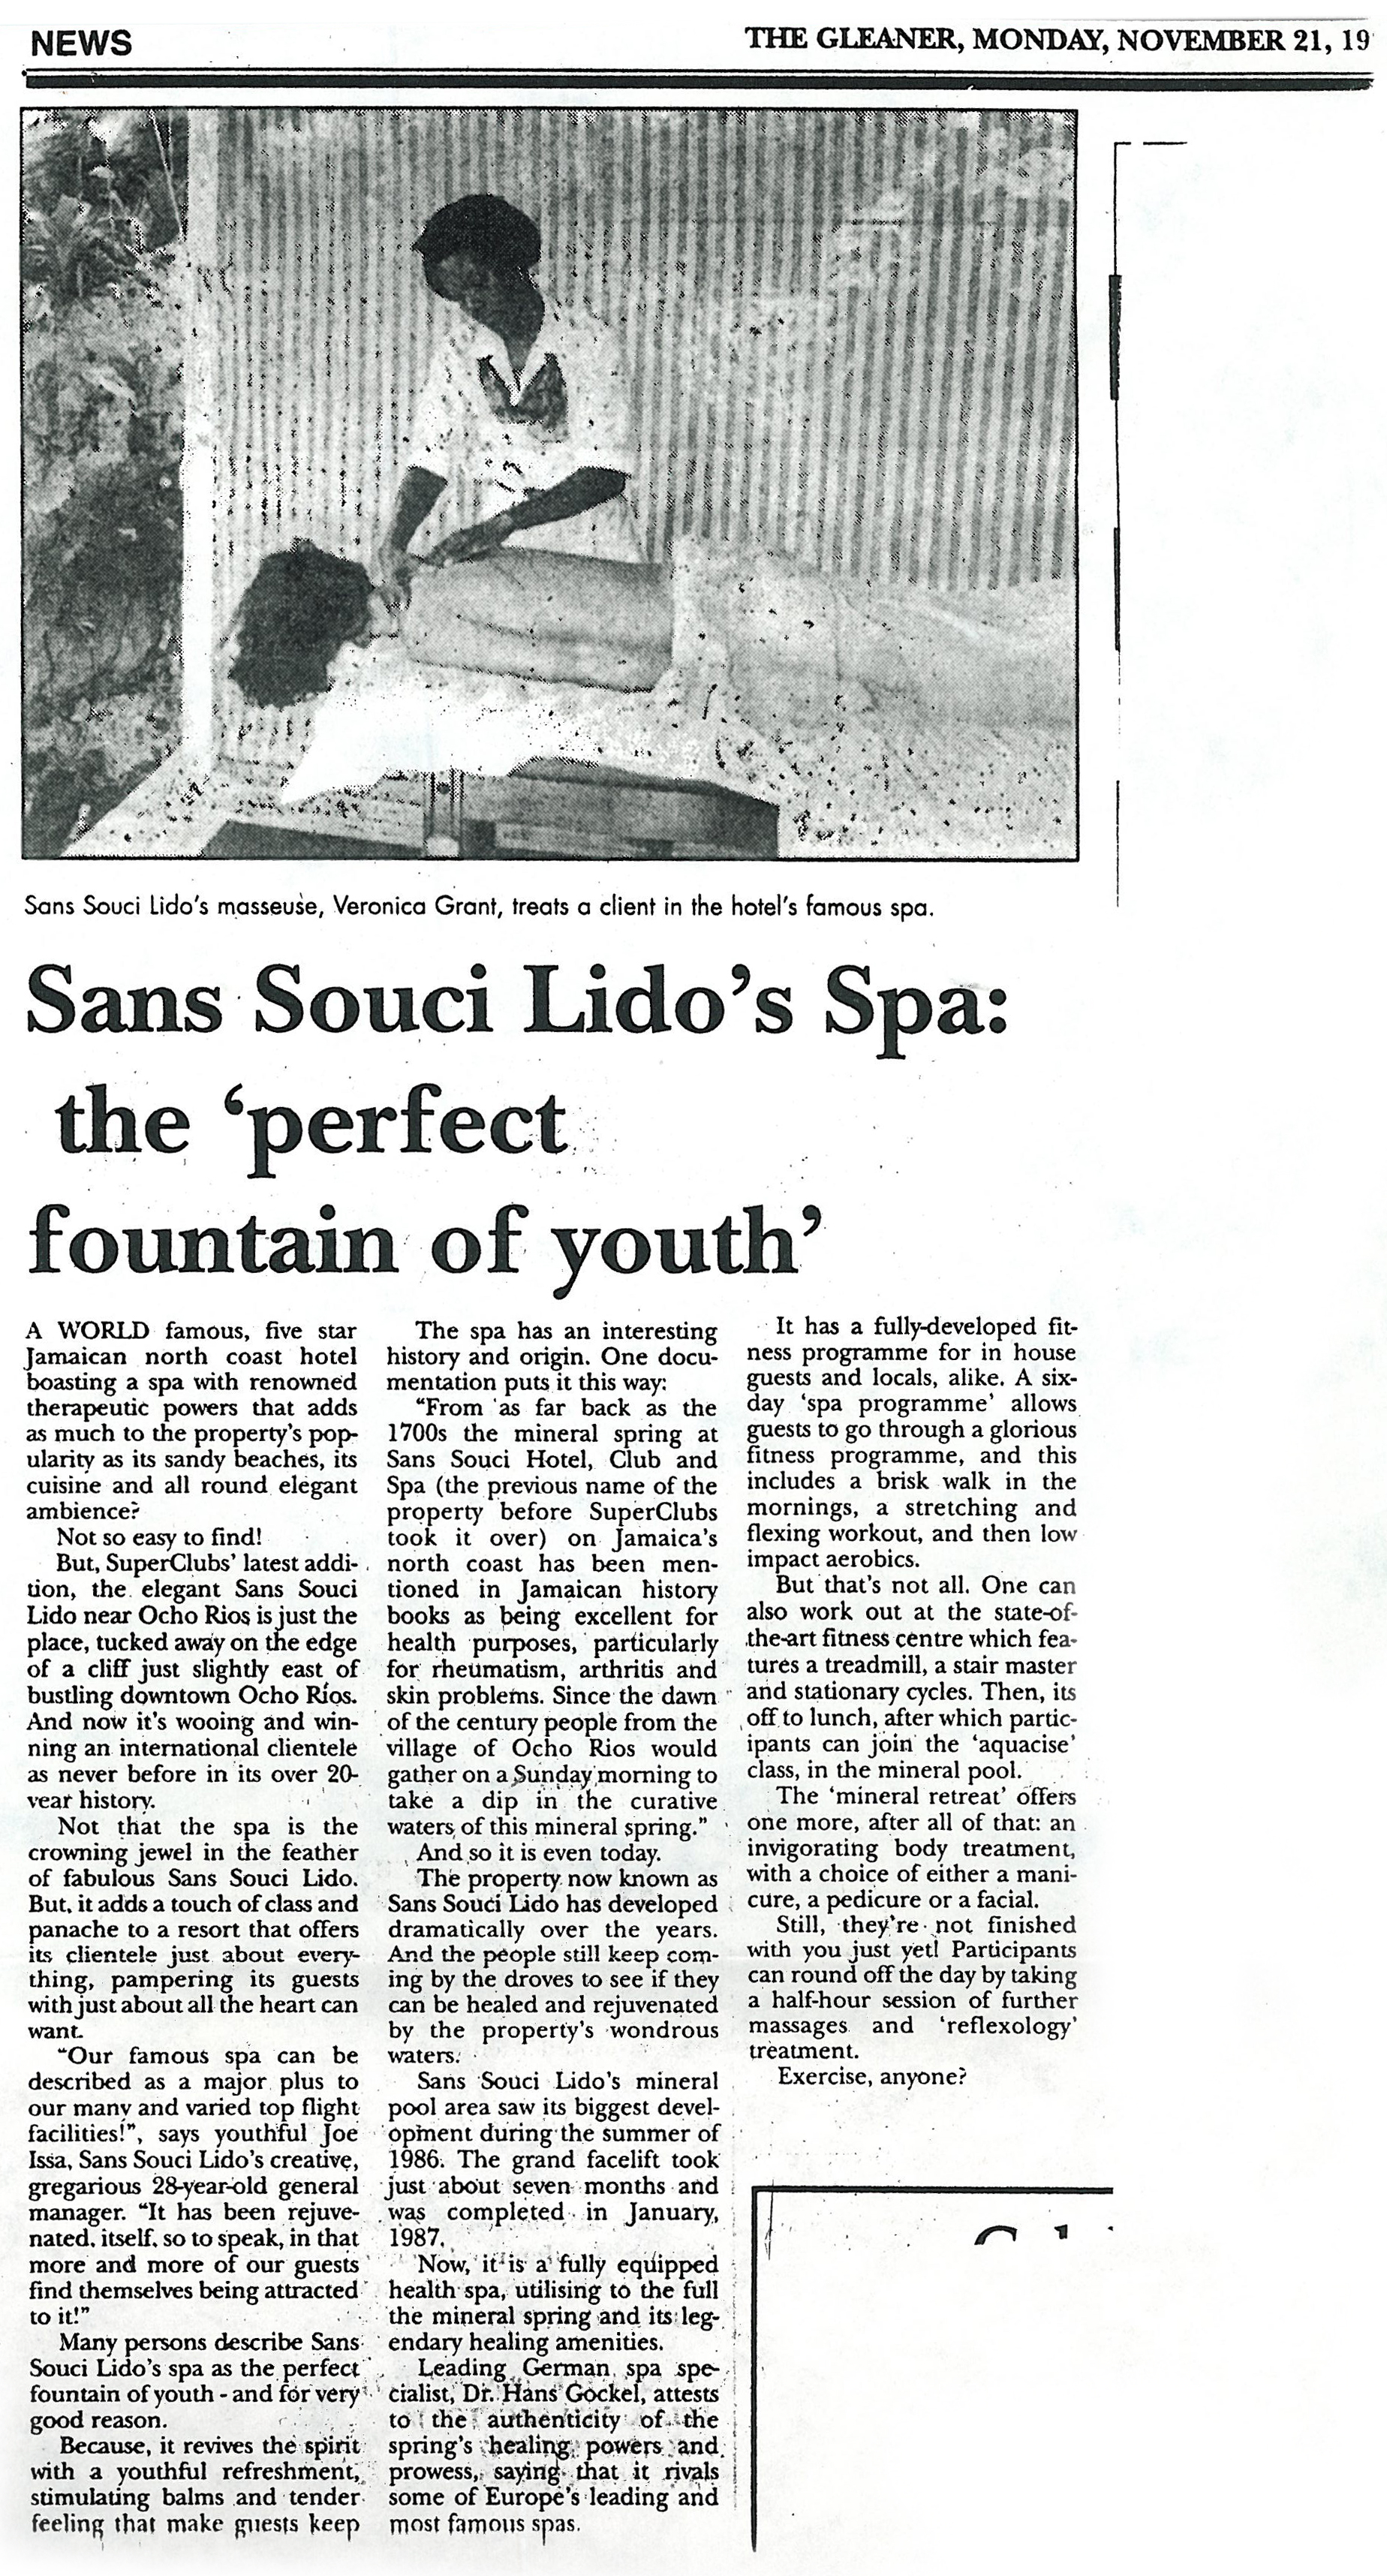 Sans Souci Lido's Spa: the 'perfect fountain of youth'